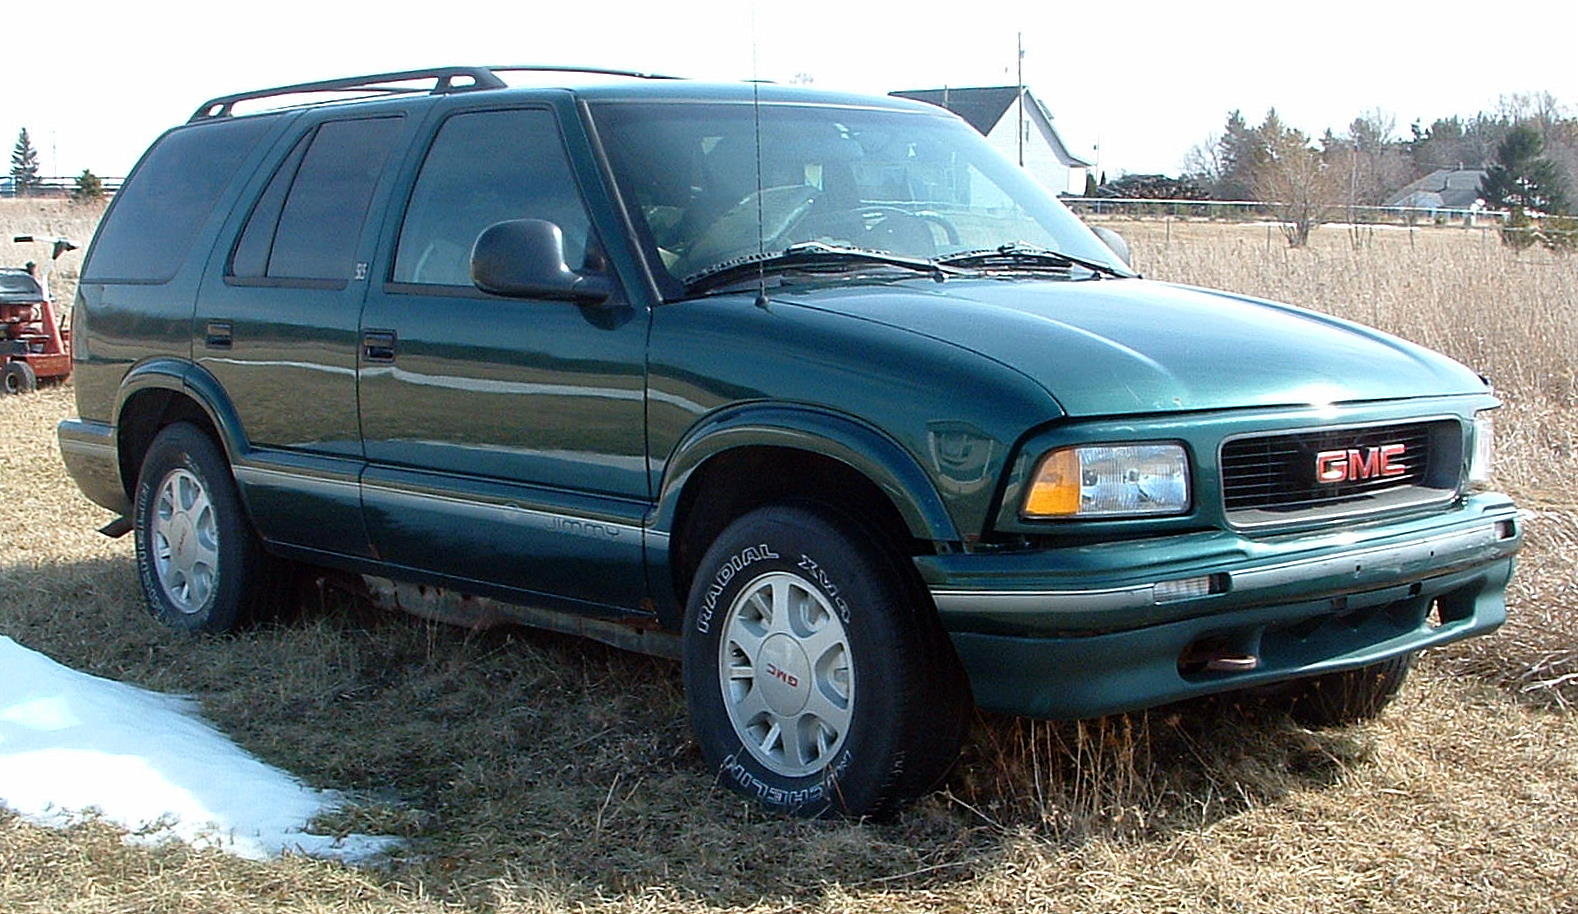 1996 Gmc jimmy used parts